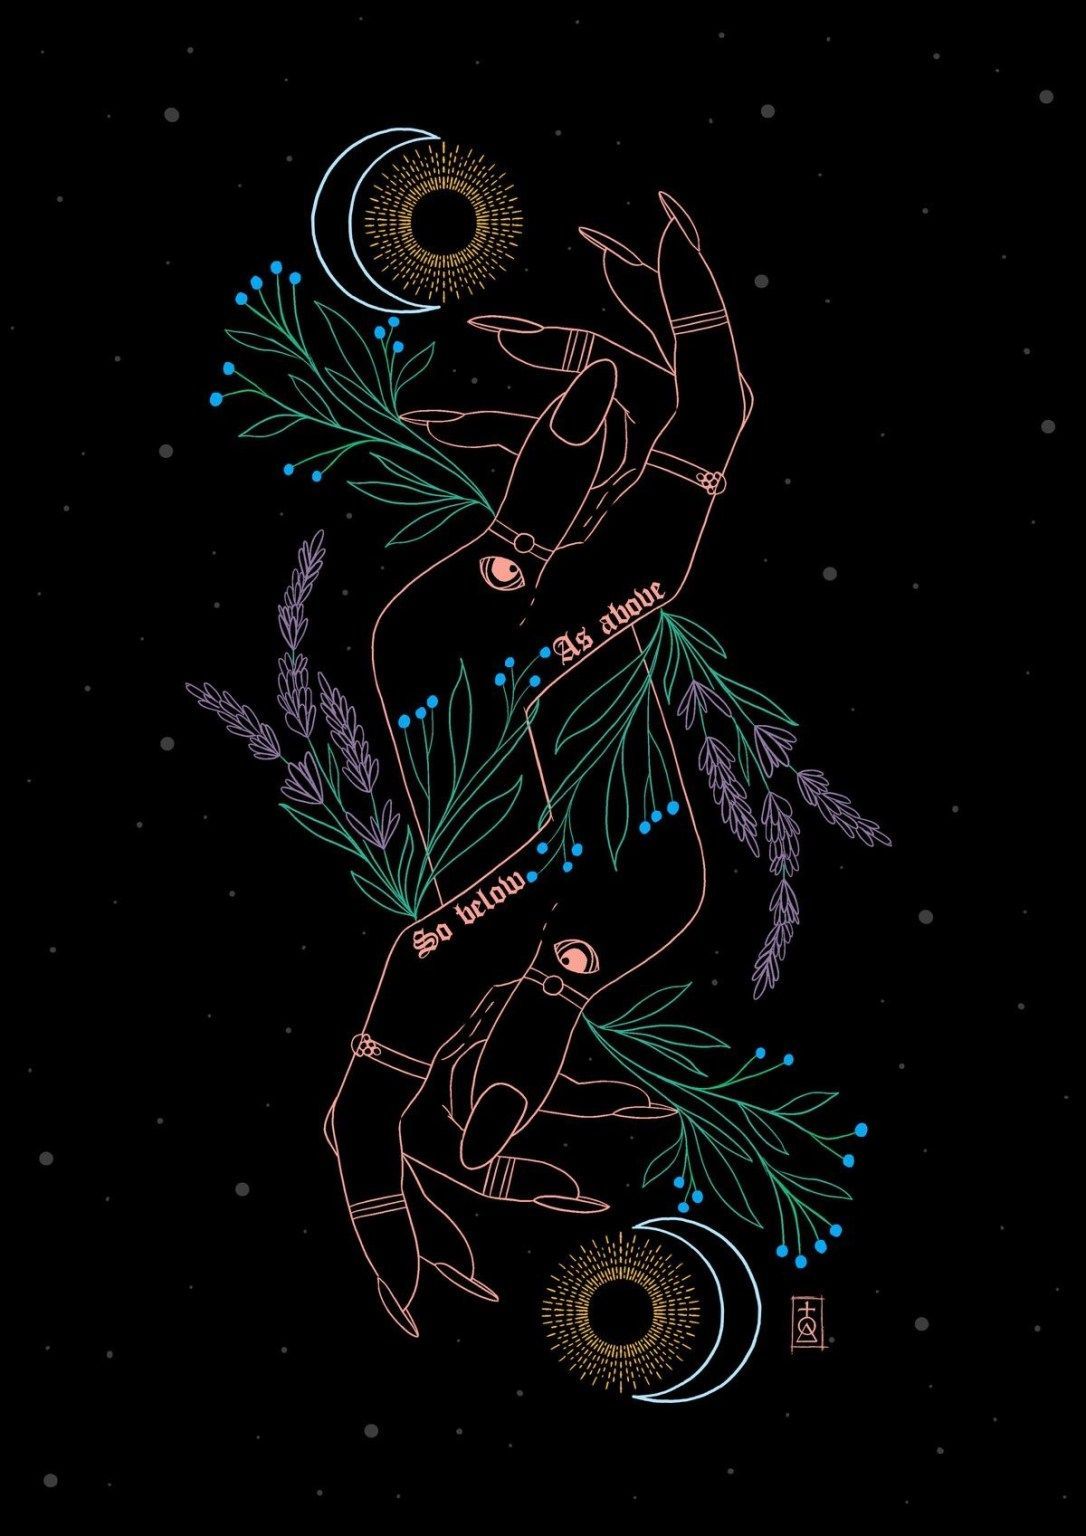 Celestial iPhone wallpaper moon & stars. Witchy wallpaper, Wiccan wallpaper, Witch wallpaper